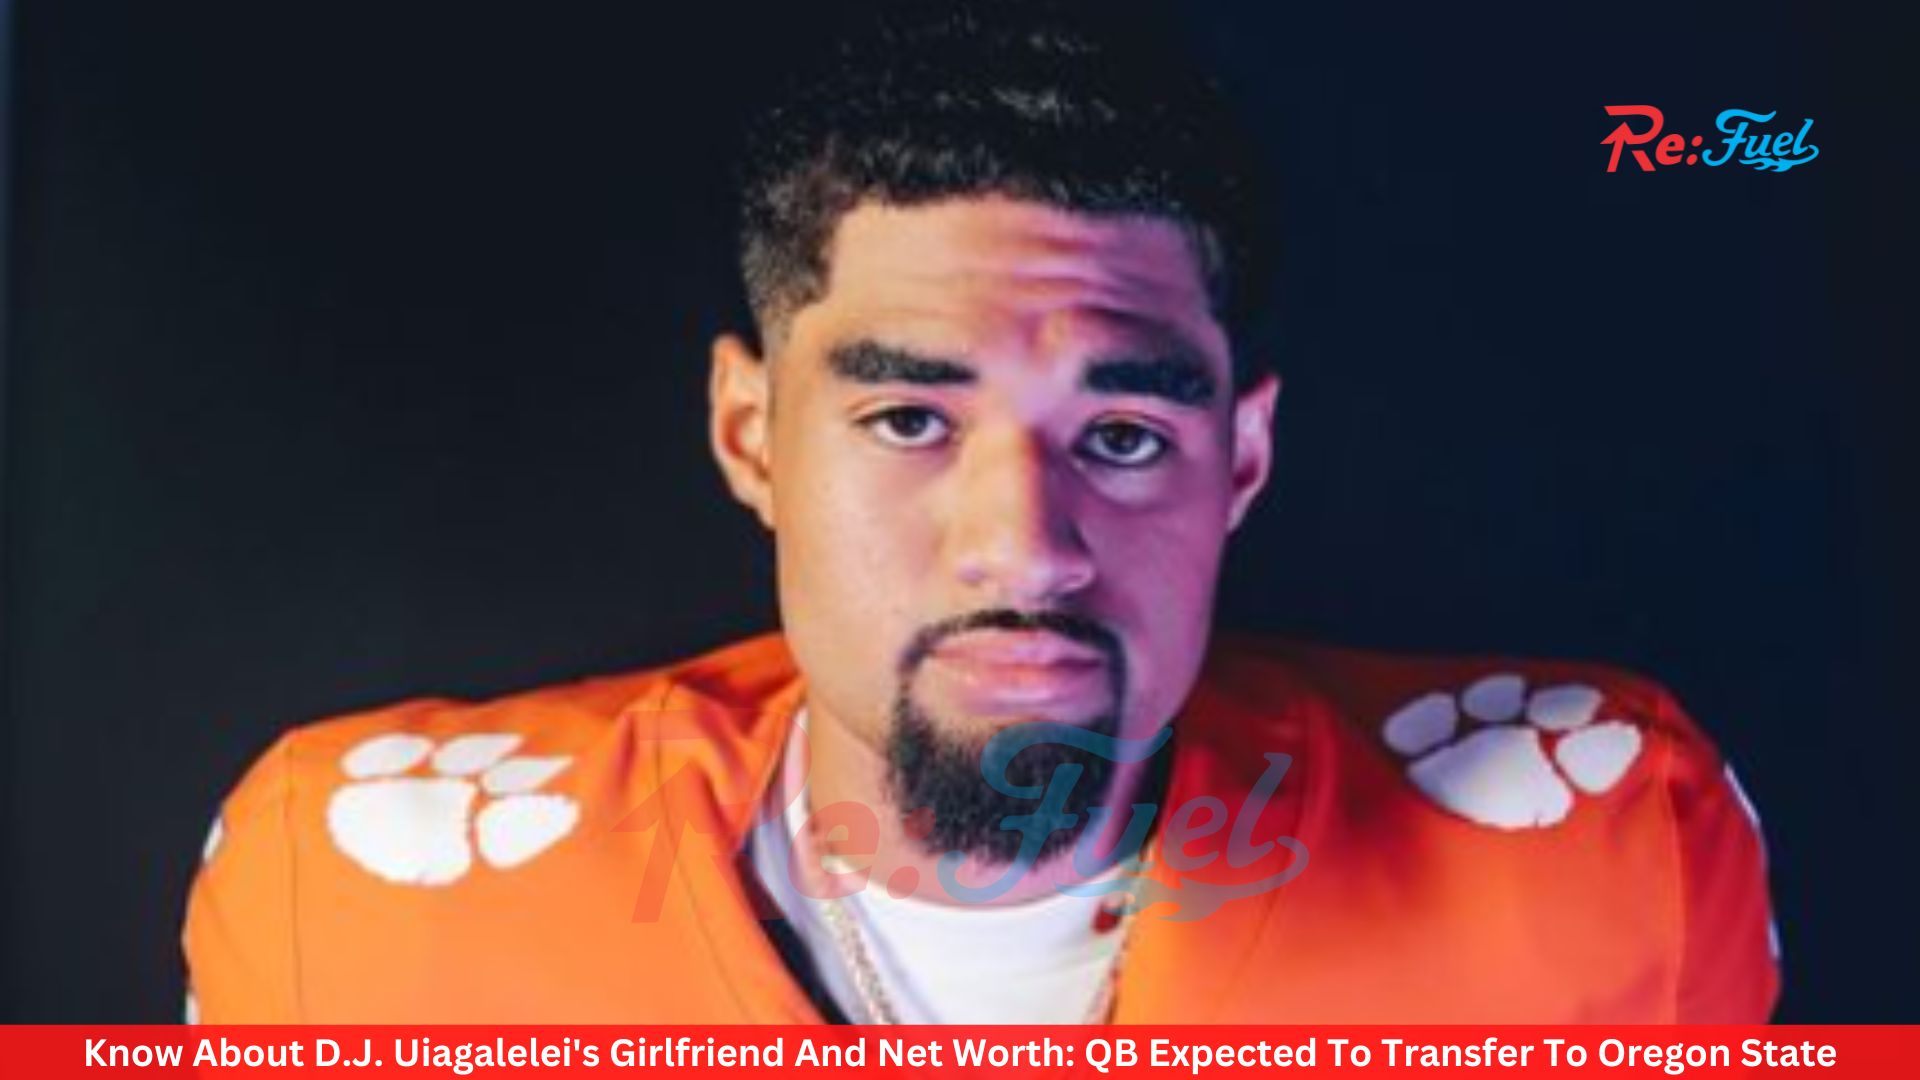 Know About D.J. Uiagalelei's Girlfriend And Net Worth: QB Expected To Transfer To Oregon State